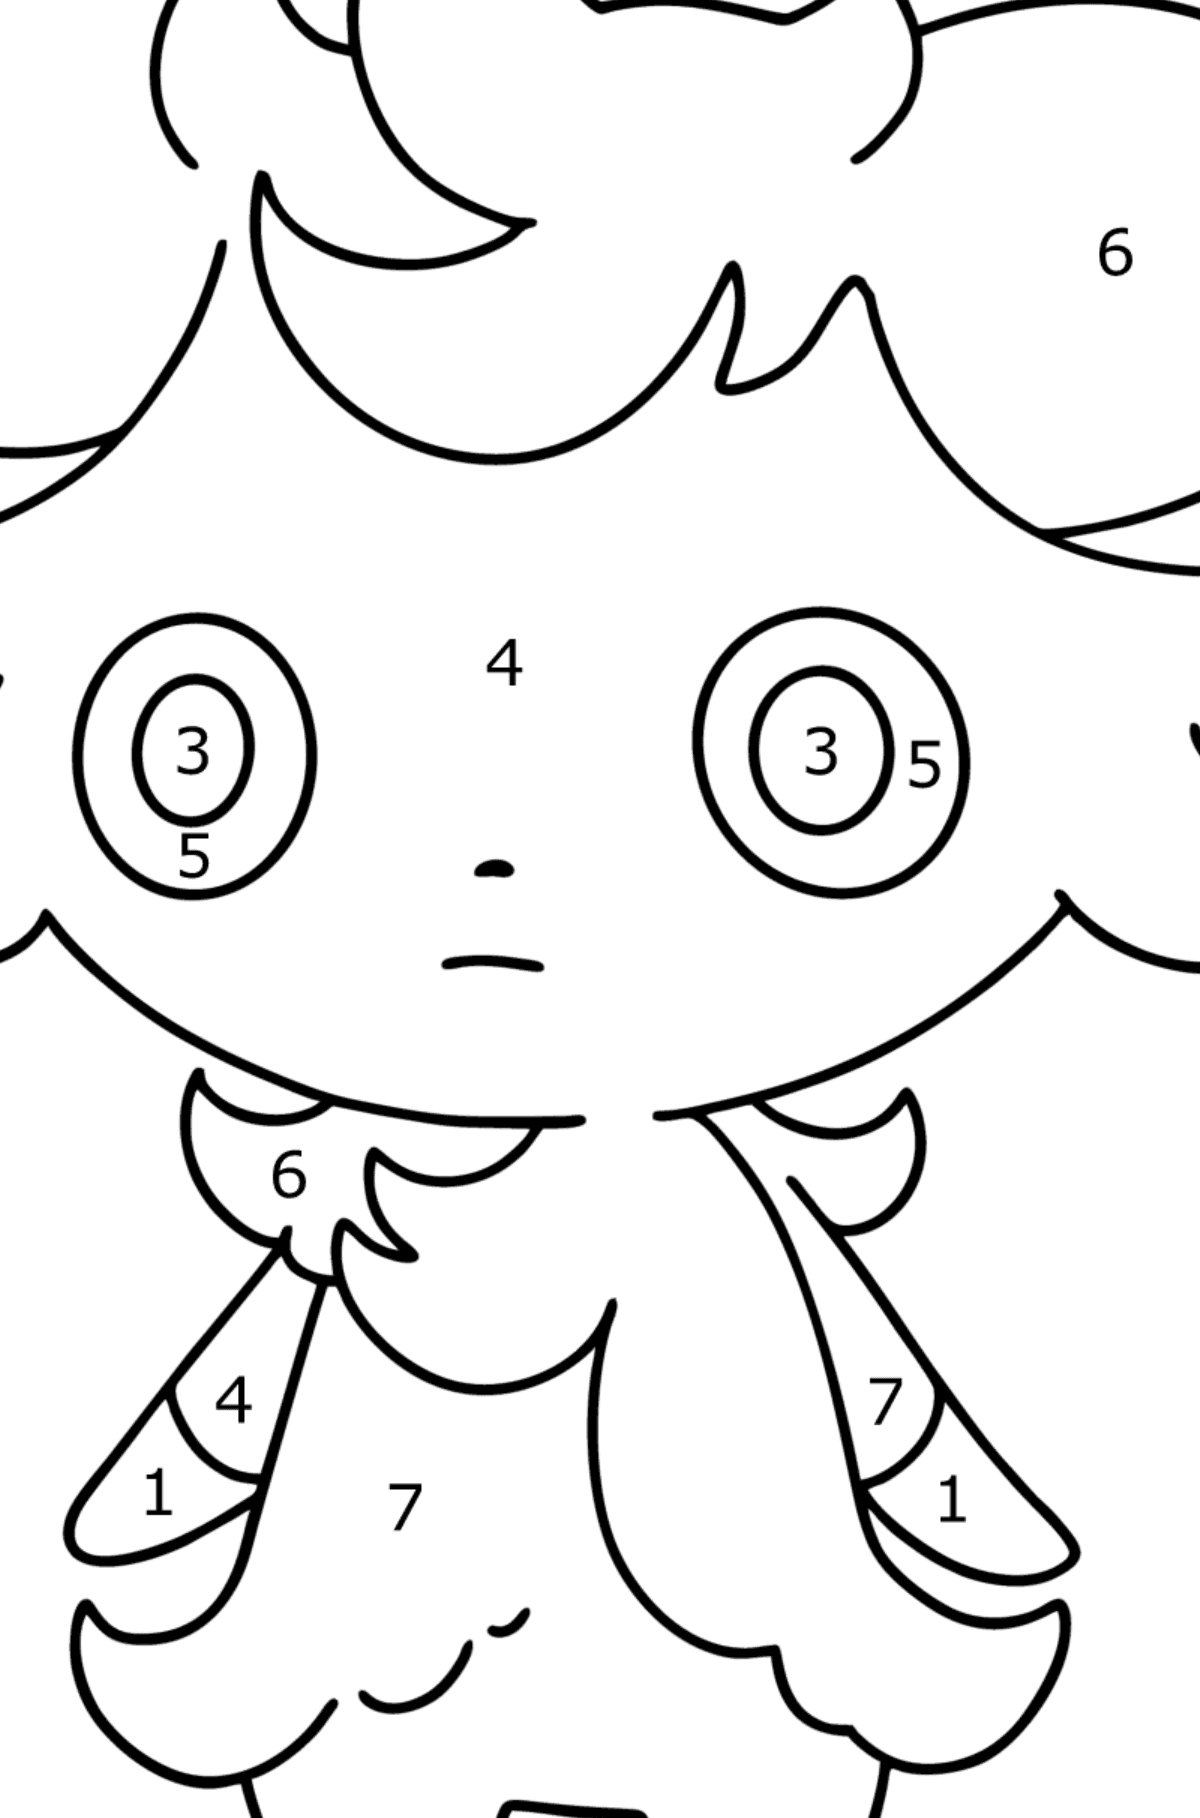 Pokemon Go Espurr coloring page - Coloring by Numbers for Kids